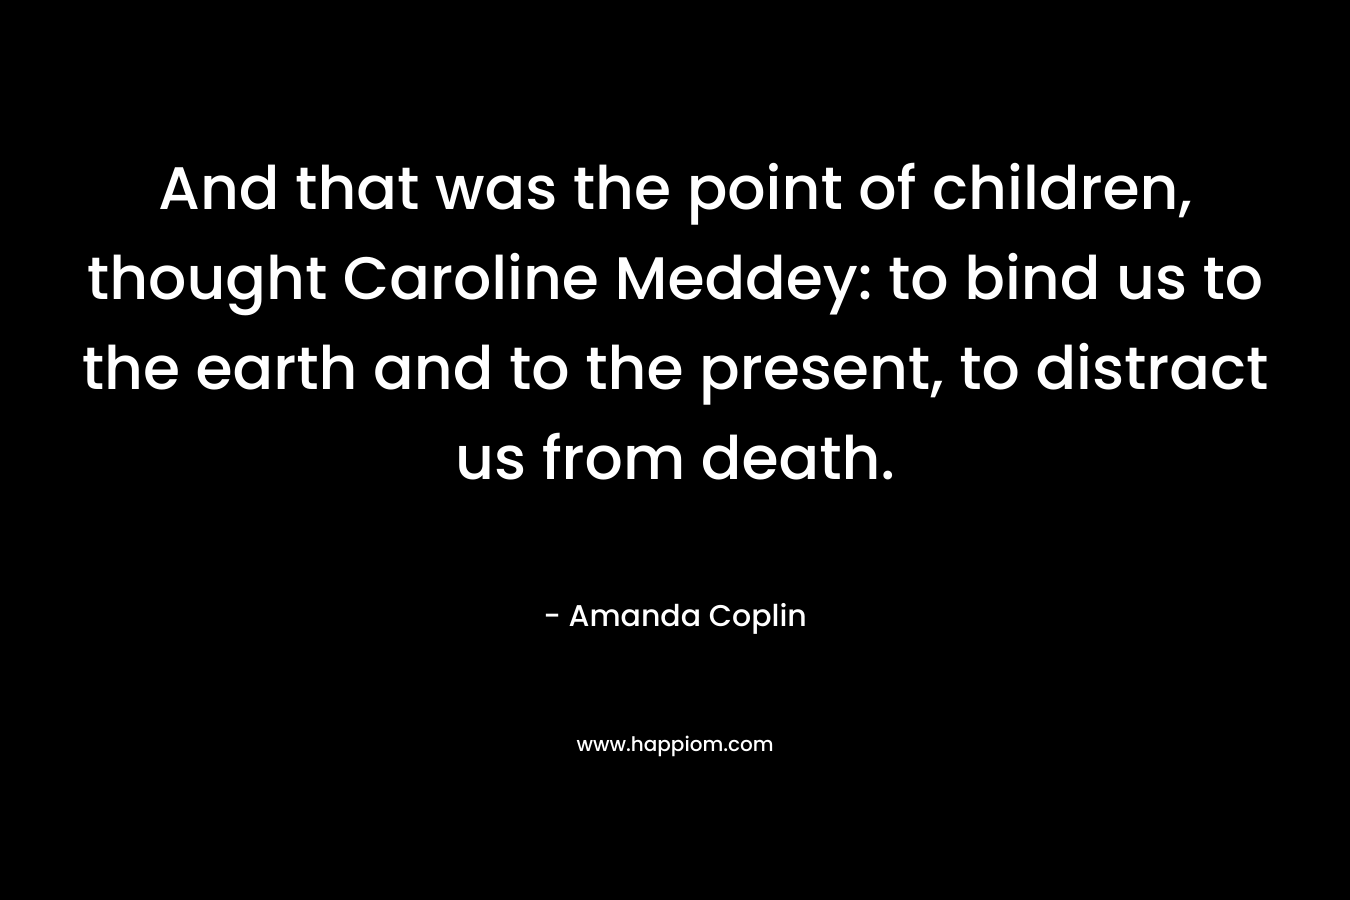 And that was the point of children, thought Caroline Meddey: to bind us to the earth and to the present, to distract us from death. – Amanda Coplin